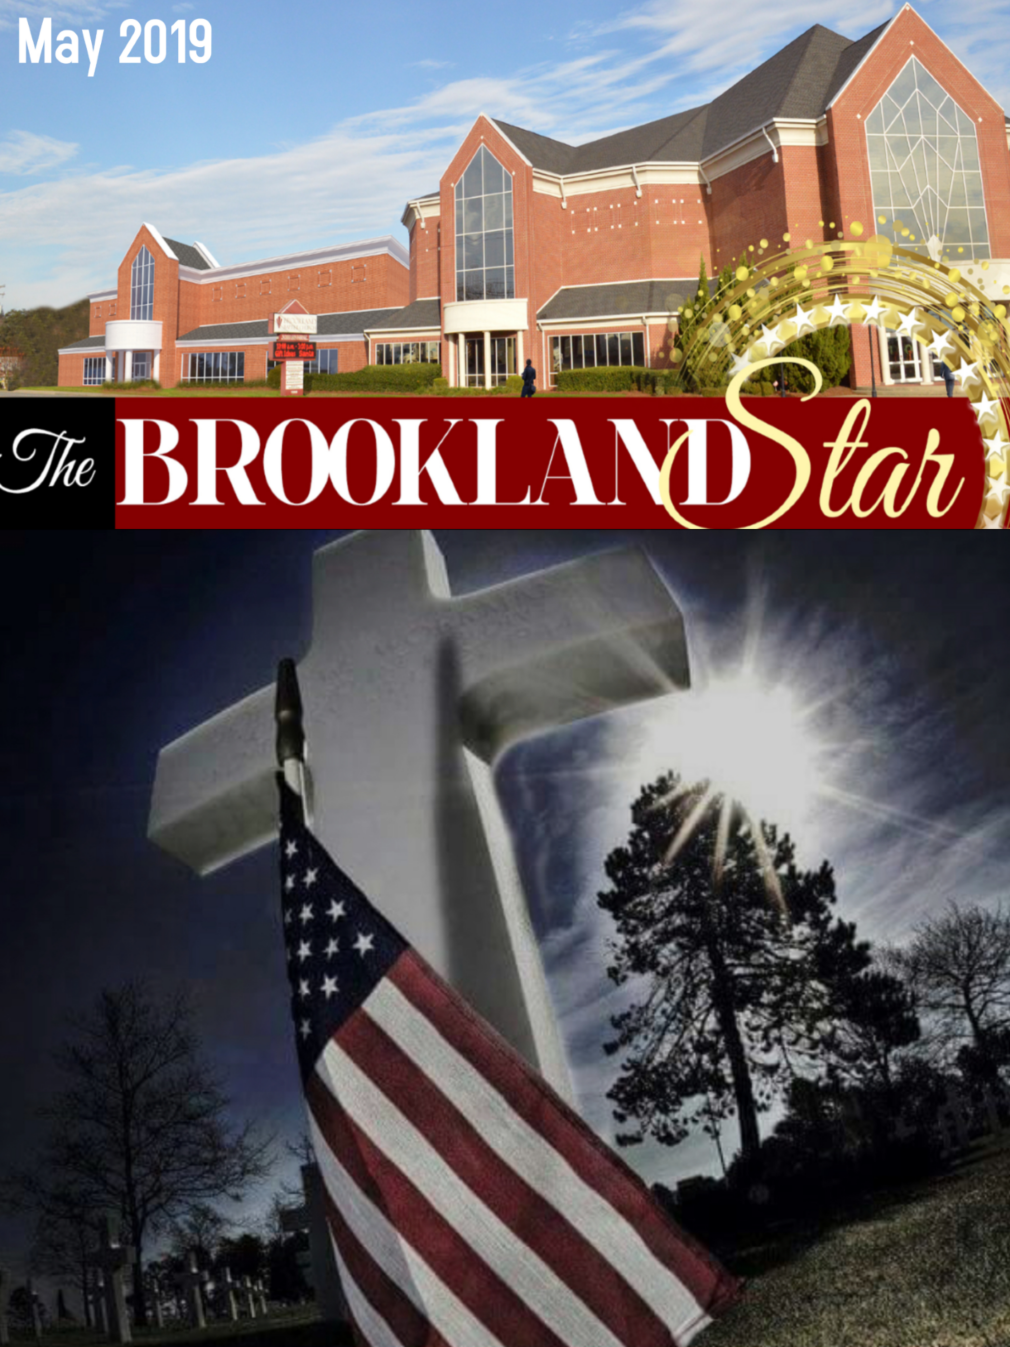 The Brookland Star May 2019 Edition